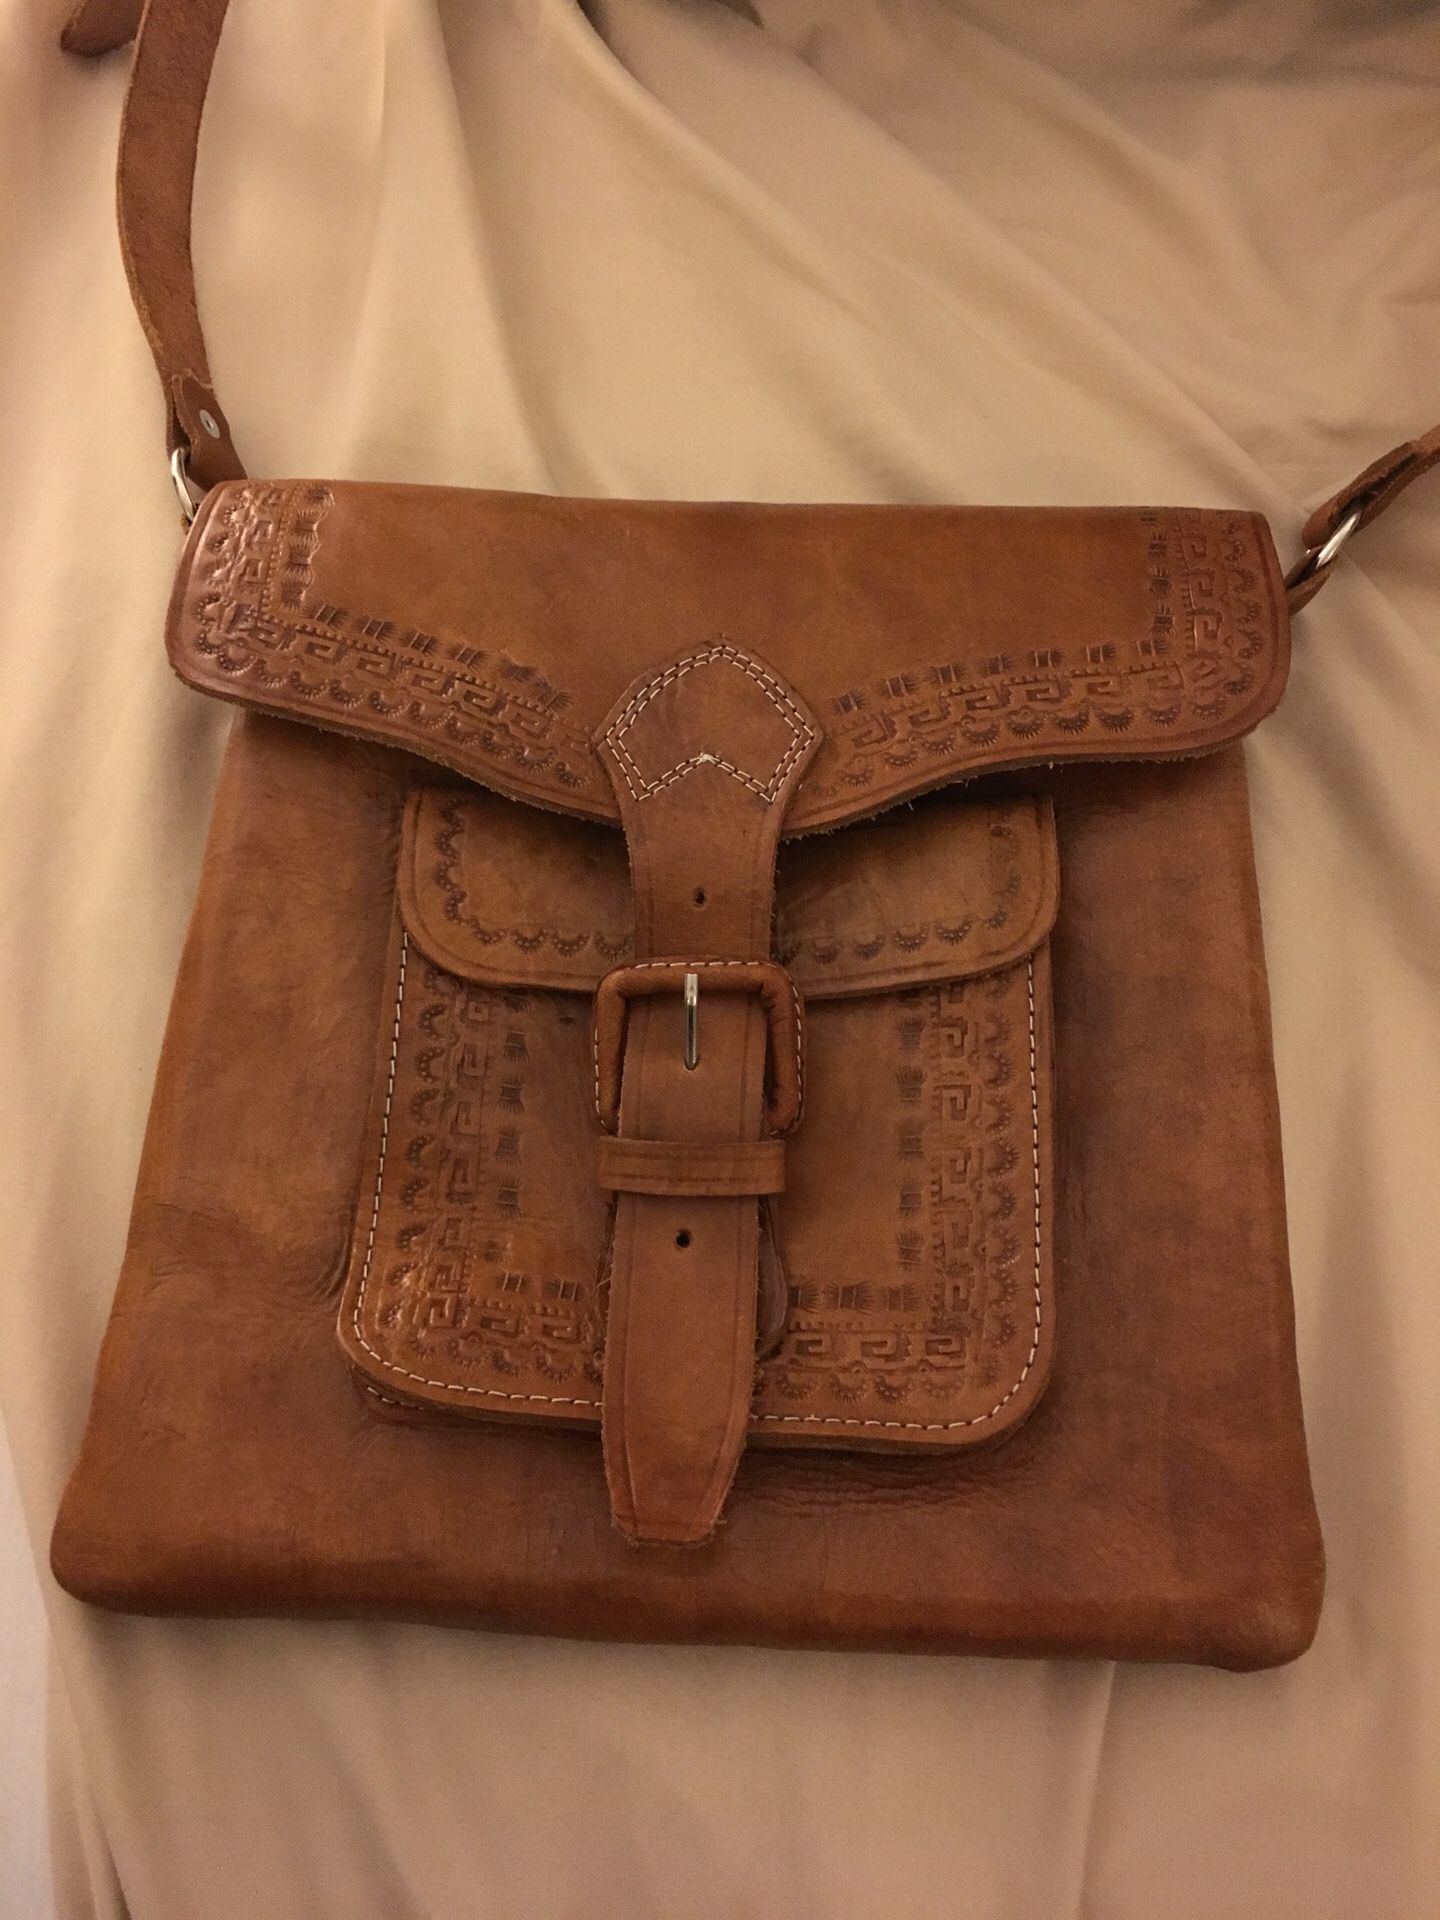 Messenger bag! Thick skin leather!